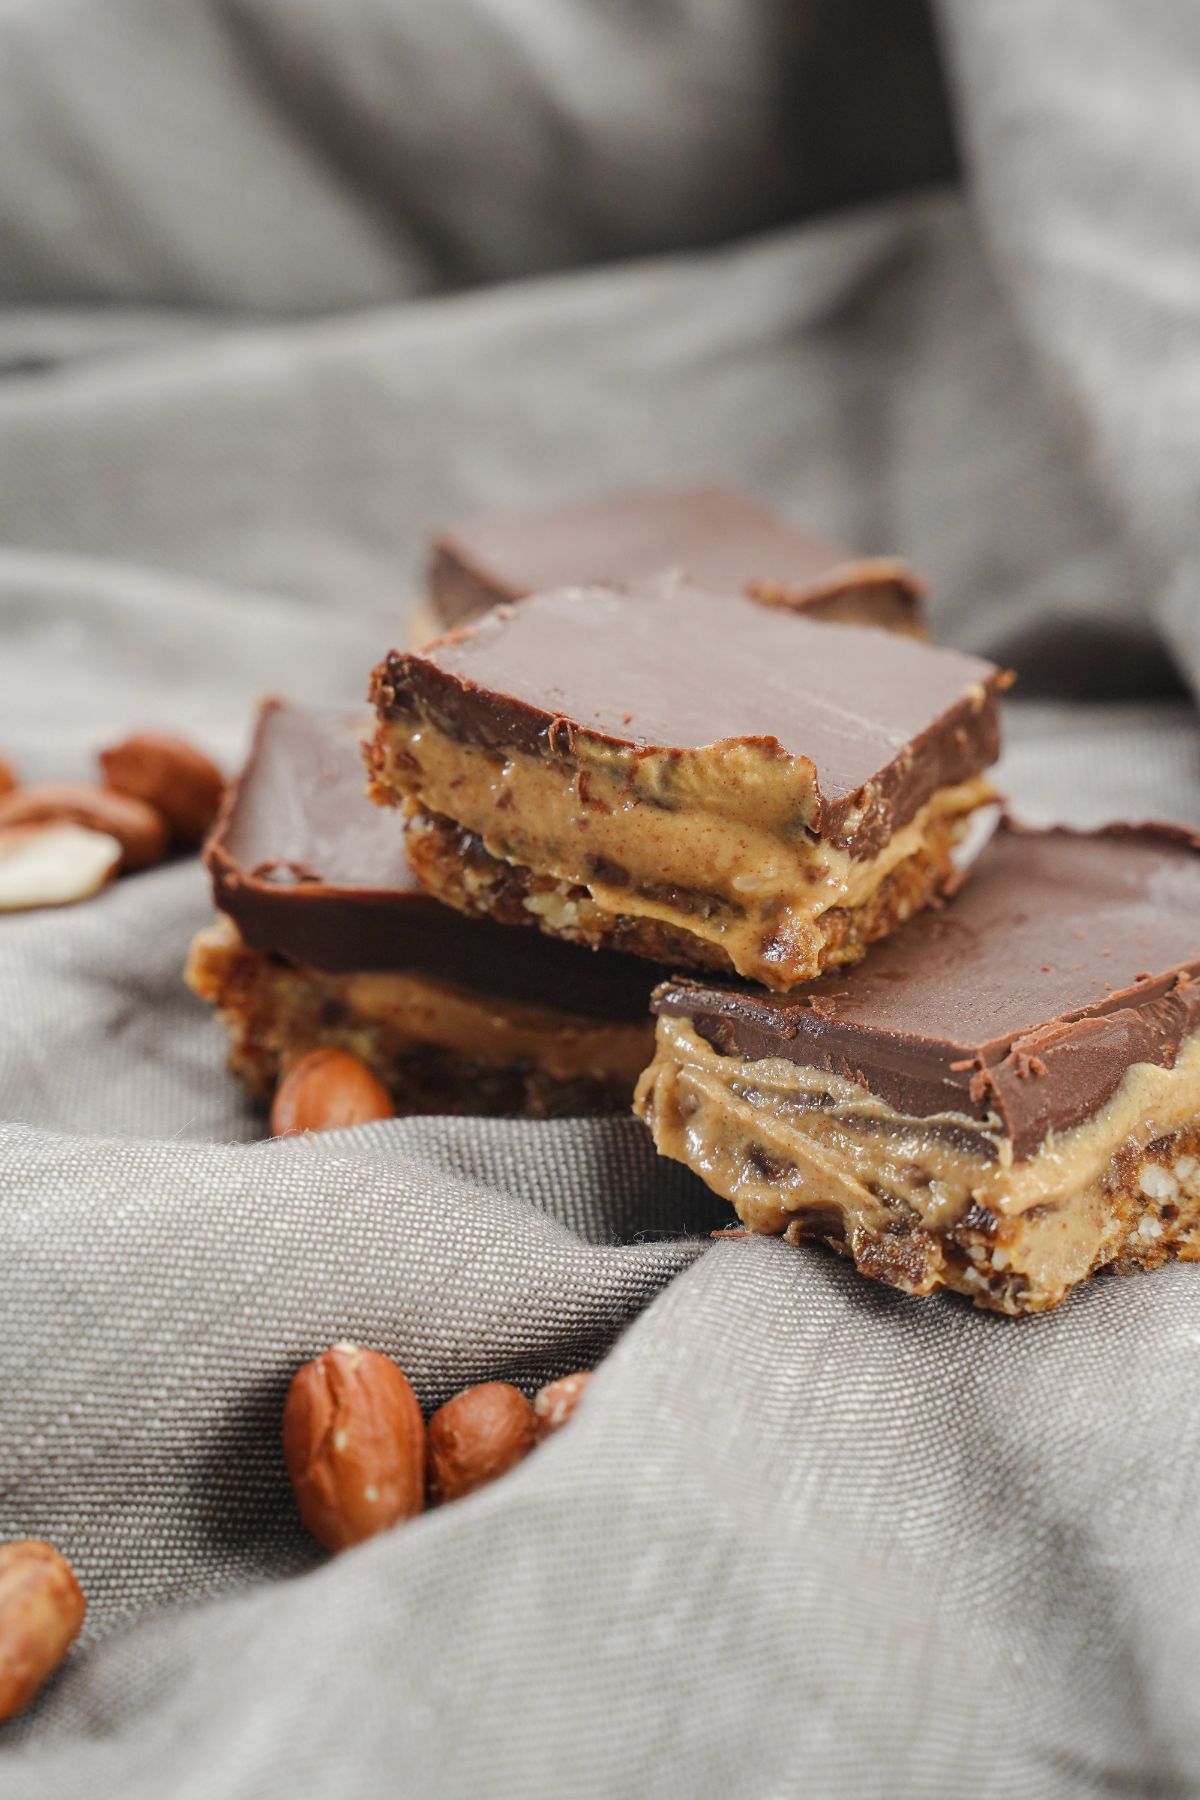 Homemade Twix Bars placed on a cloth